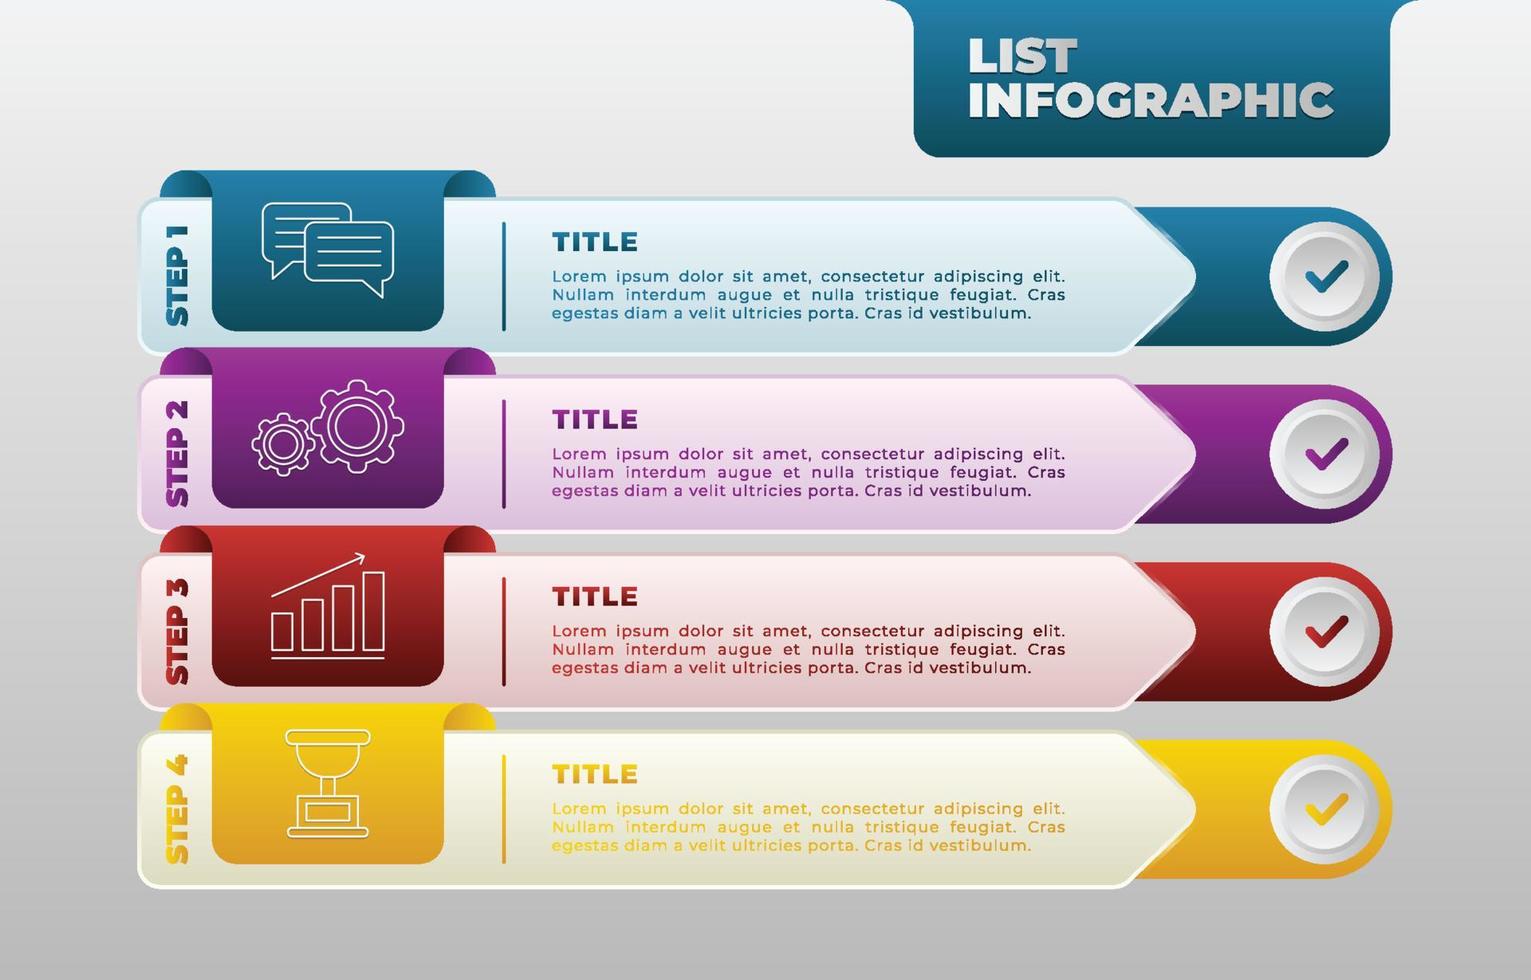 List Infographic Template vector